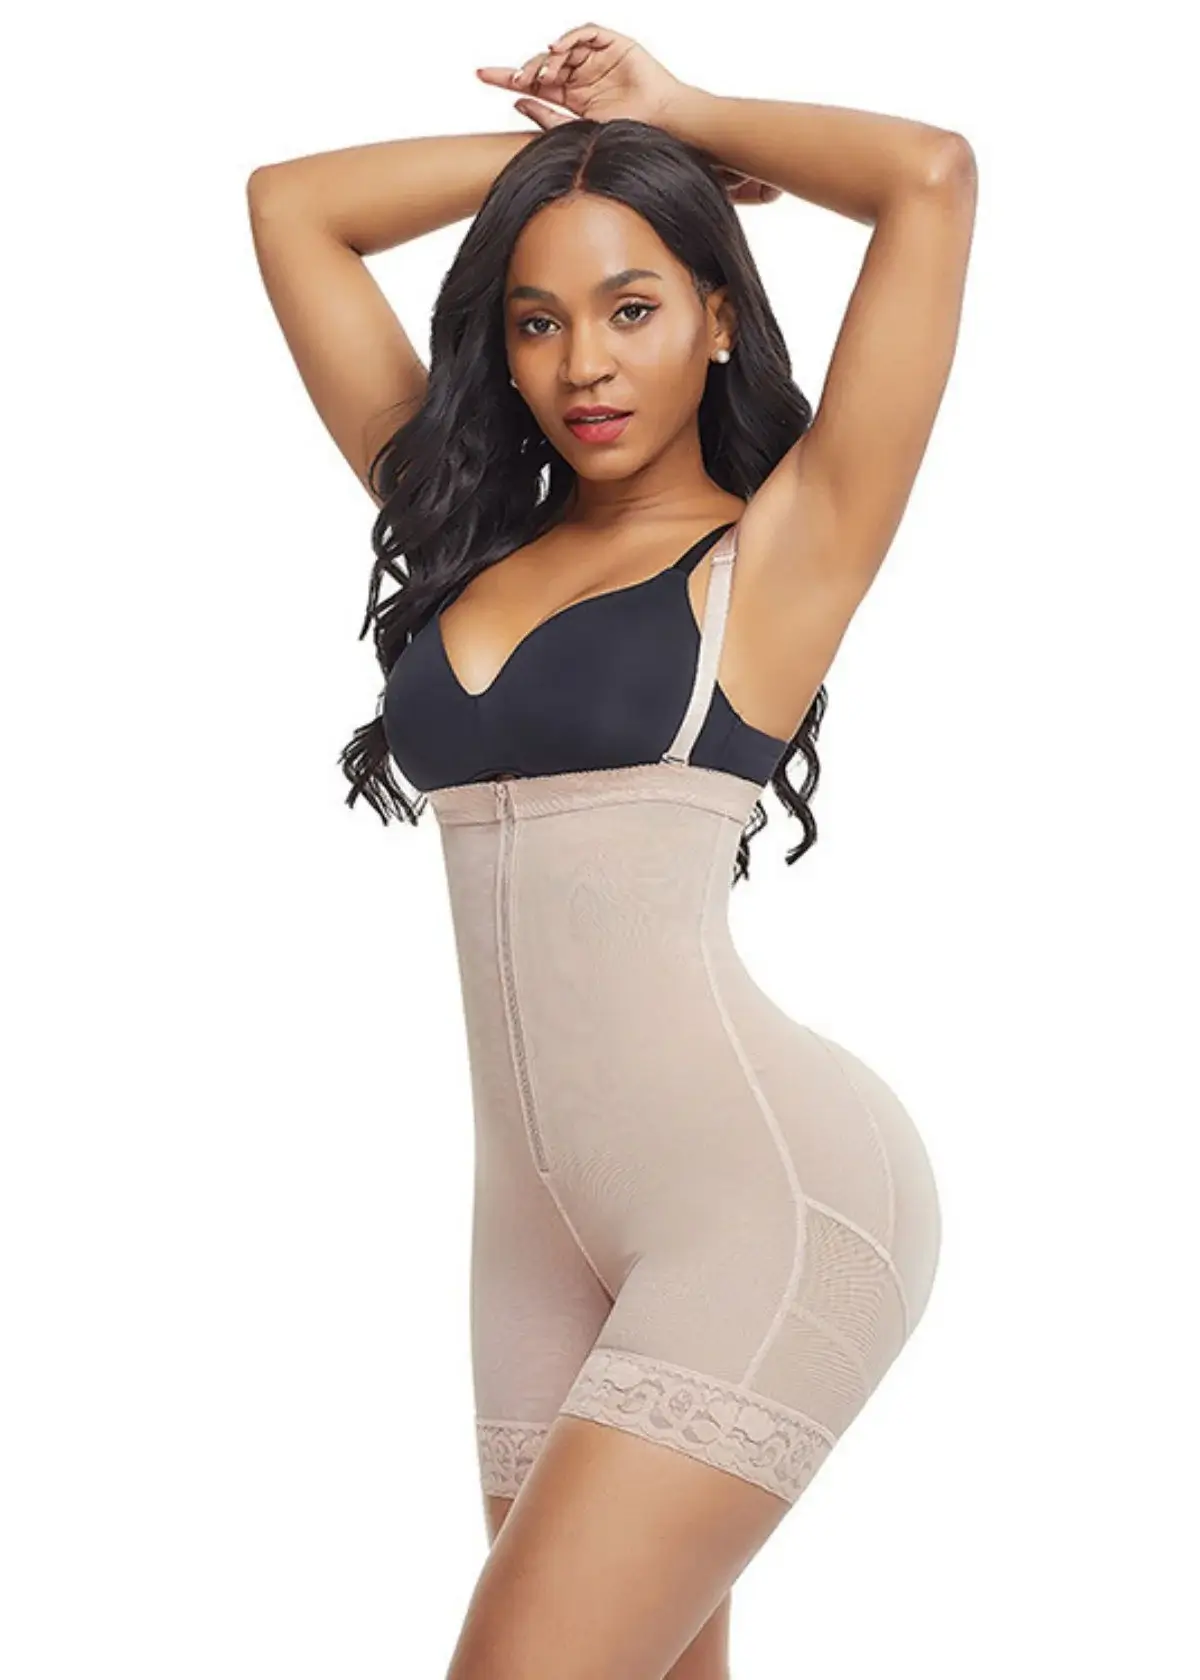 Are body shapers suitable for all body shapes and sizes?